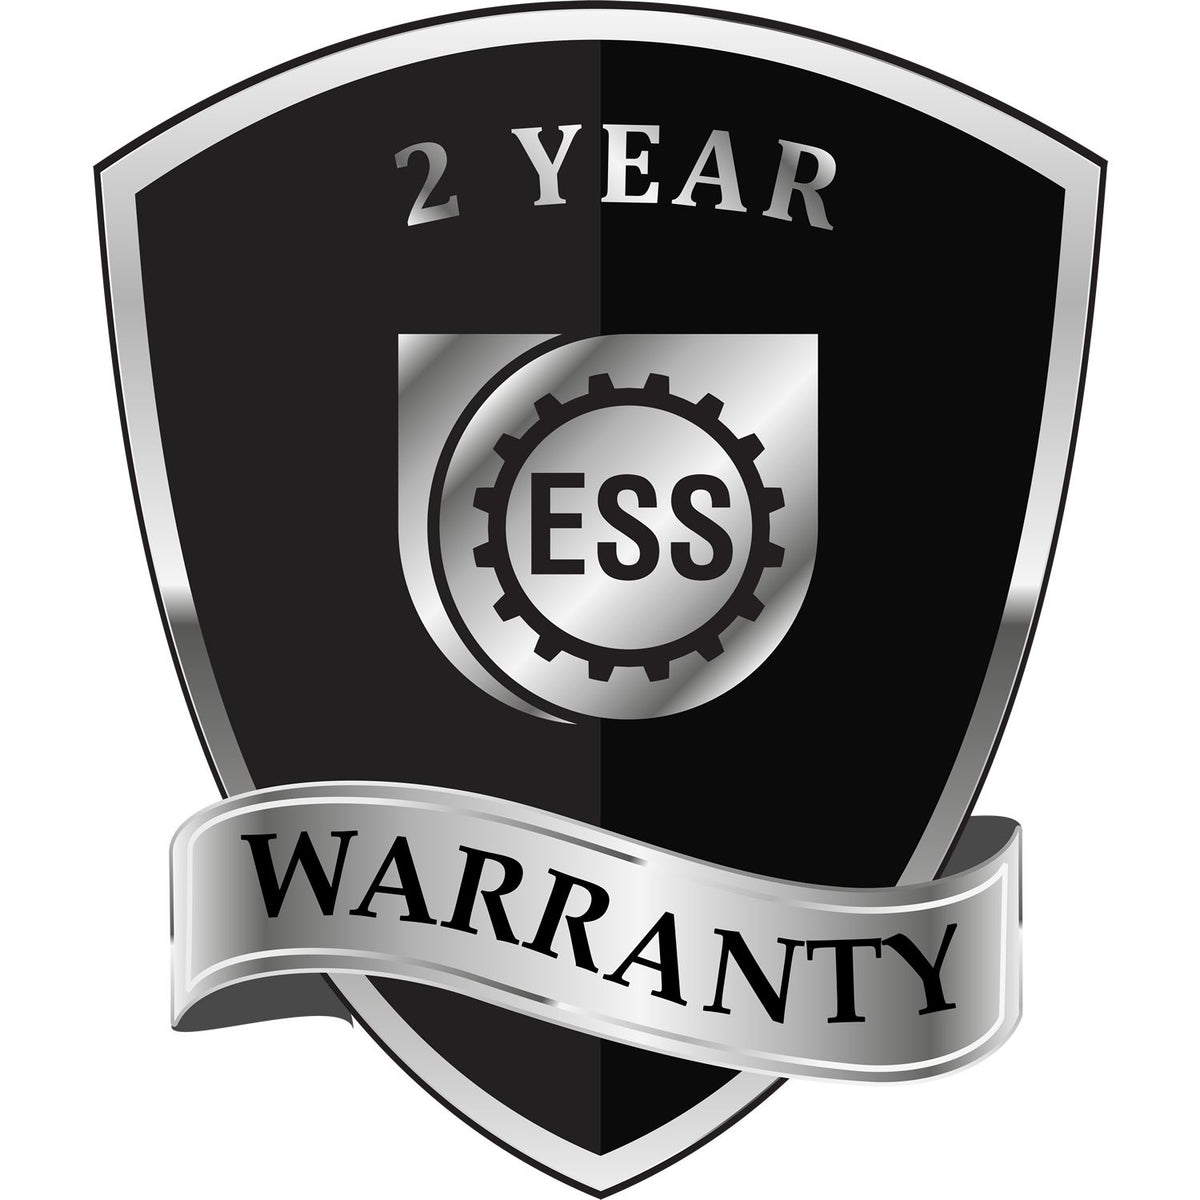 A badge or emblem showing a warranty icon for the State of Missouri Long Reach Architectural Embossing Seal